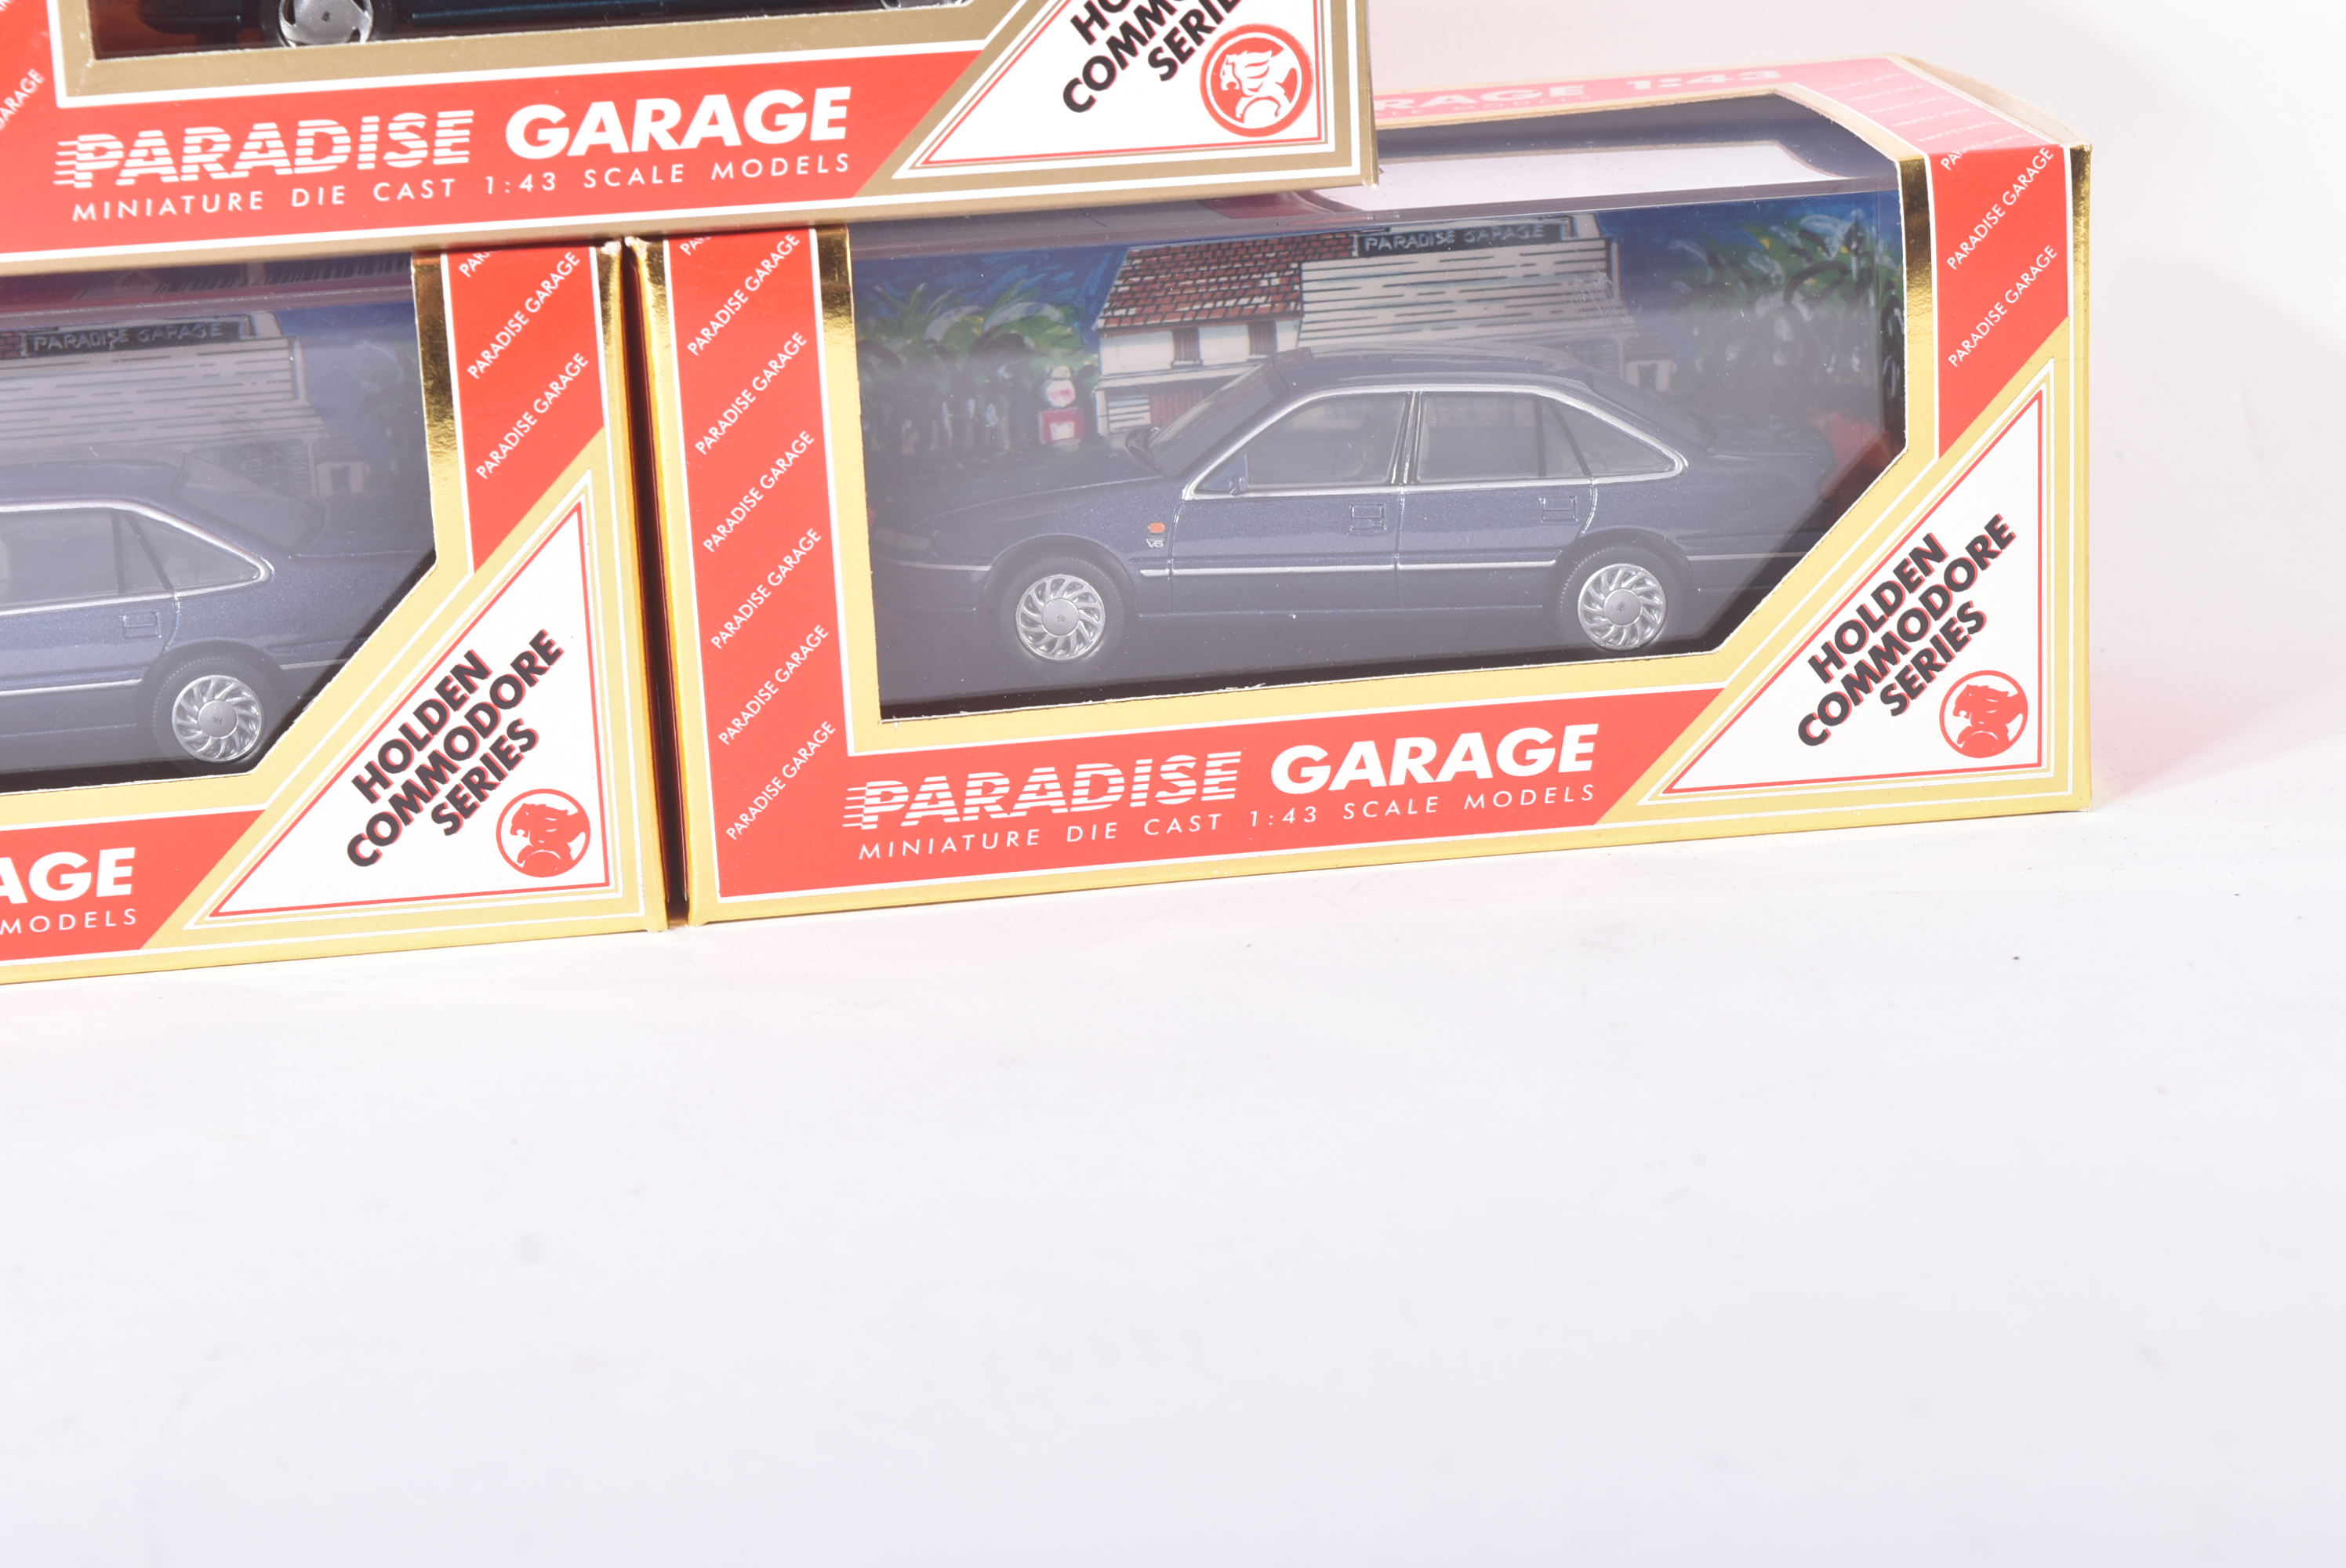 PARADISE GARAGE - 1/43 SCALE PRECISION DIECAST MODELS - Image 4 of 6